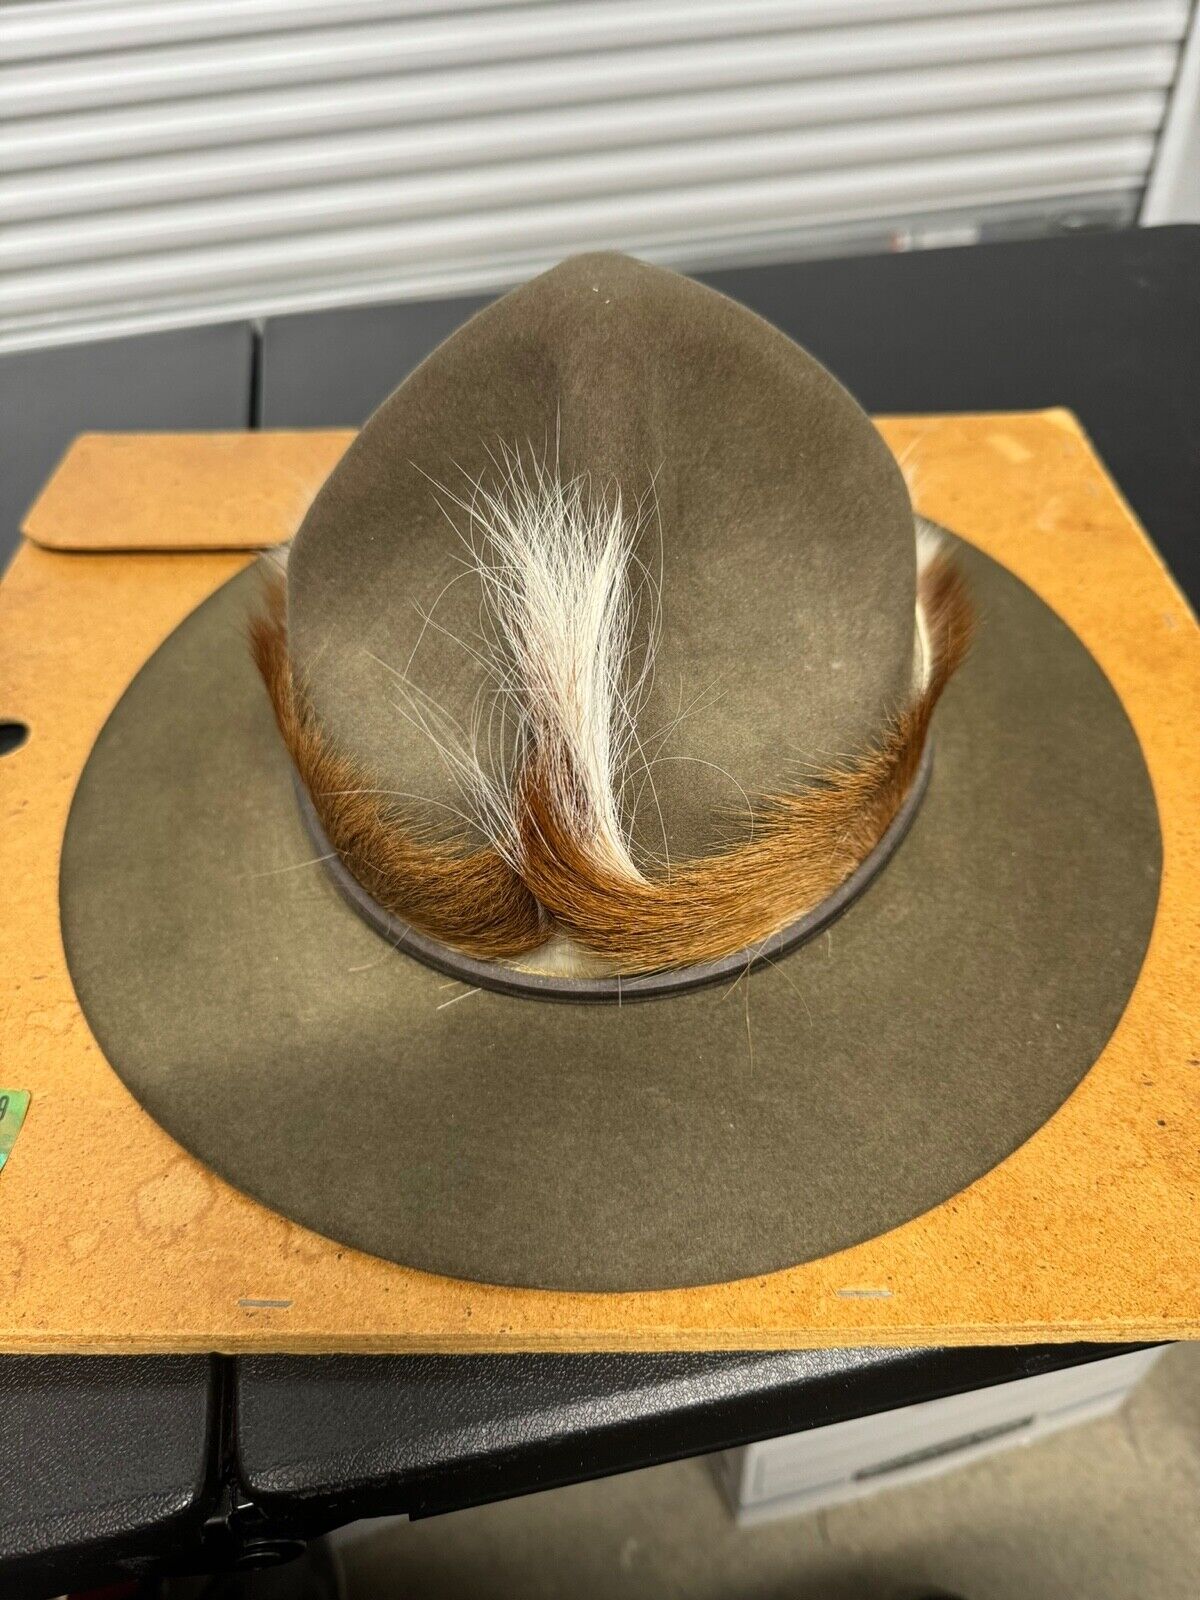 Scoutmaster felt hat Boy Scout. Robert Bayden Powell style with deer skin ring.